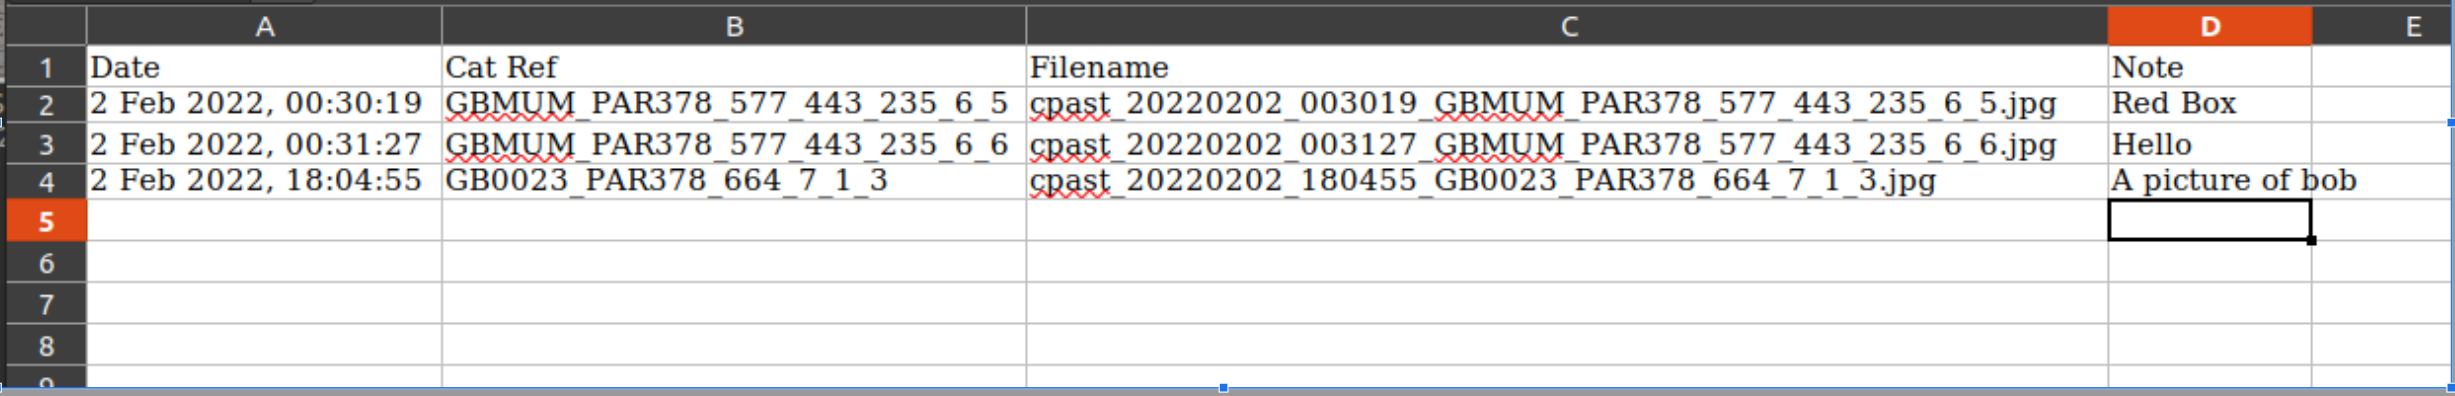 image of a log file in a spreadsheet program